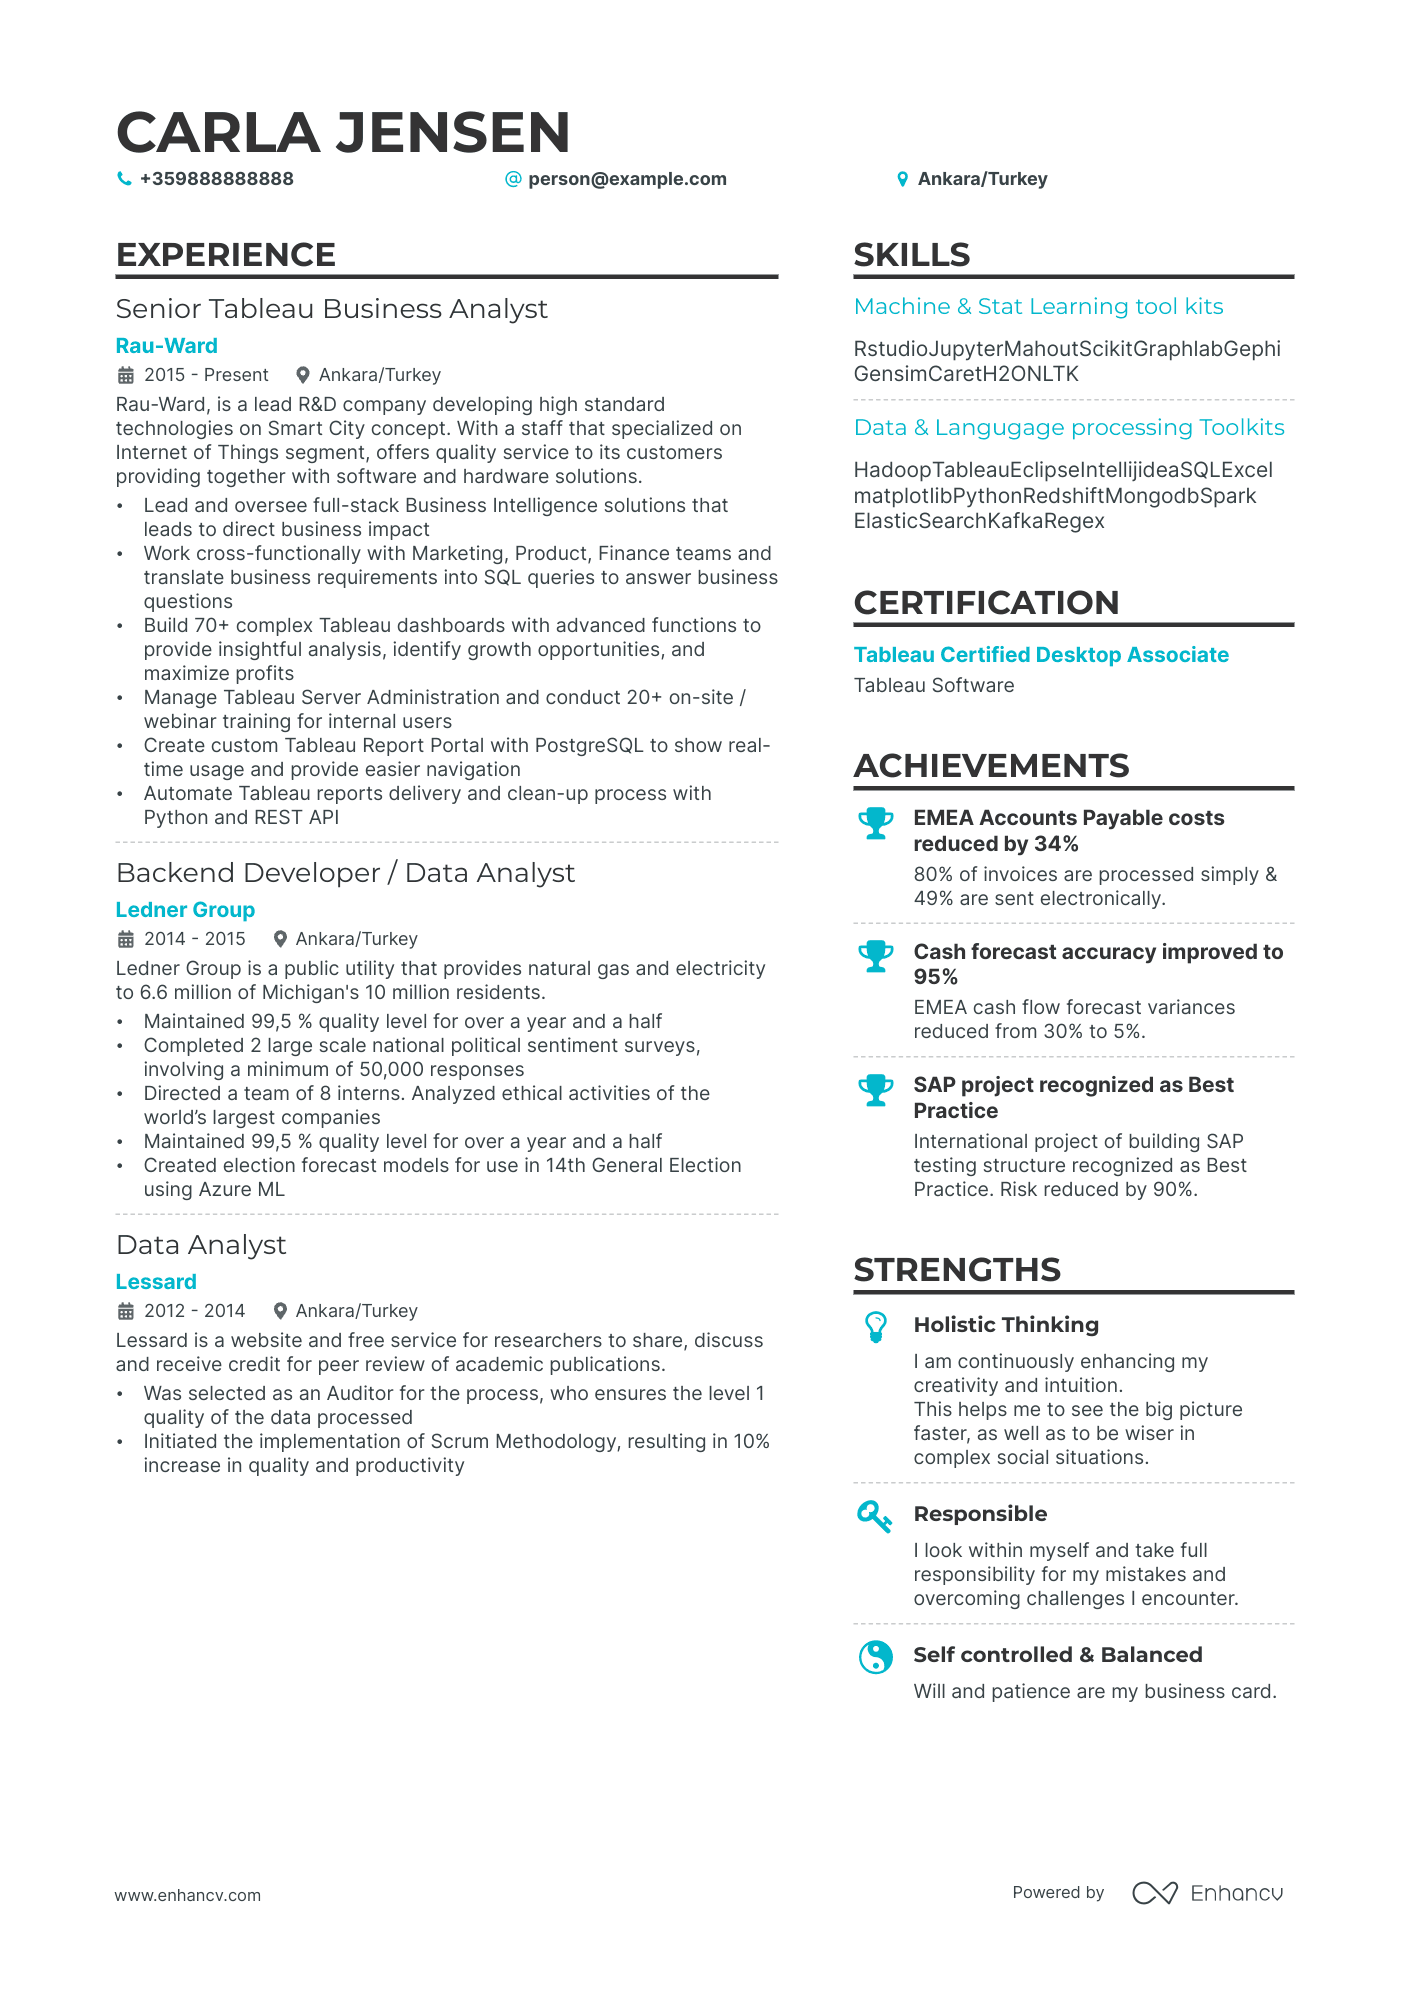 Tableau Business Analyst resume example